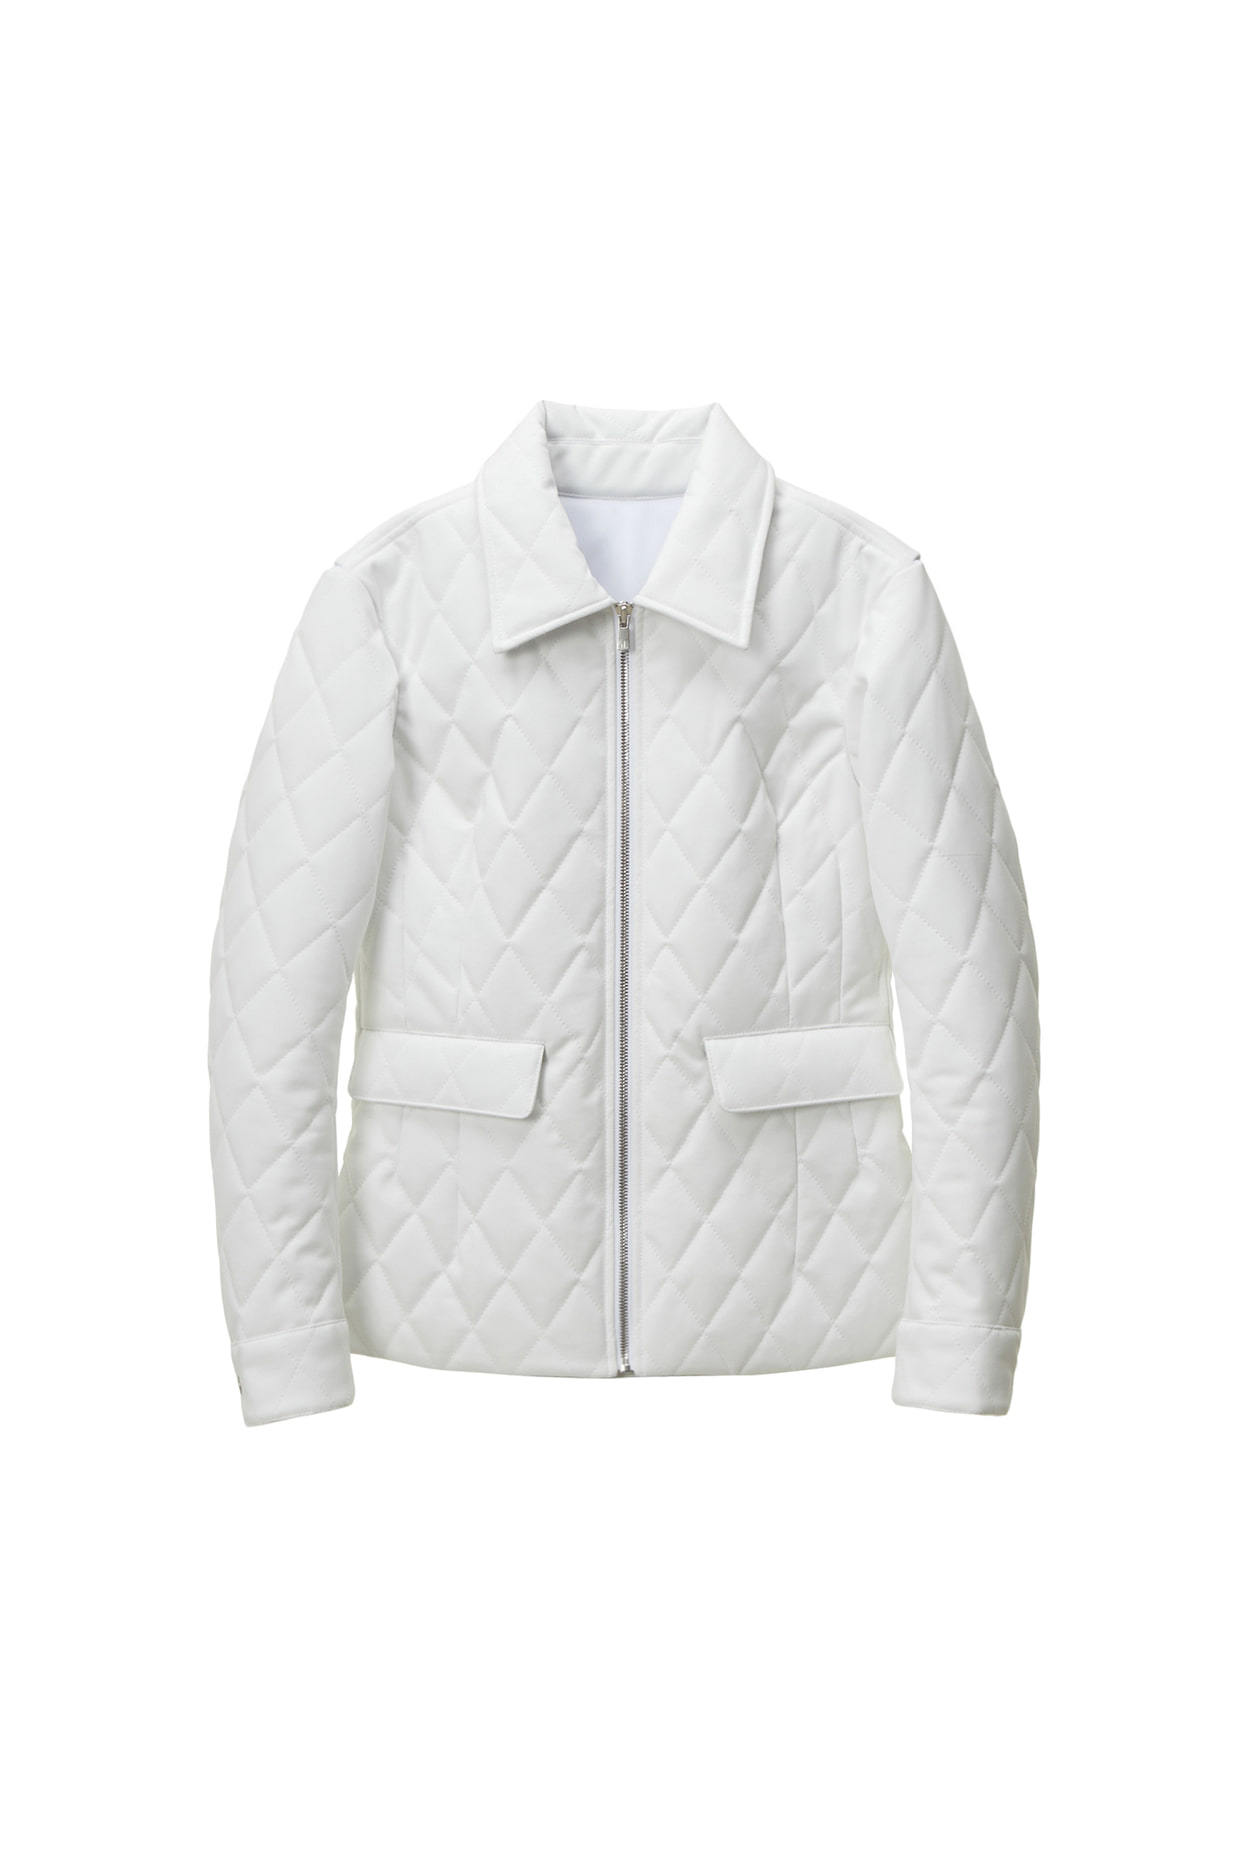 W DIAMOND QUILTED TWILL JACKET WHITE